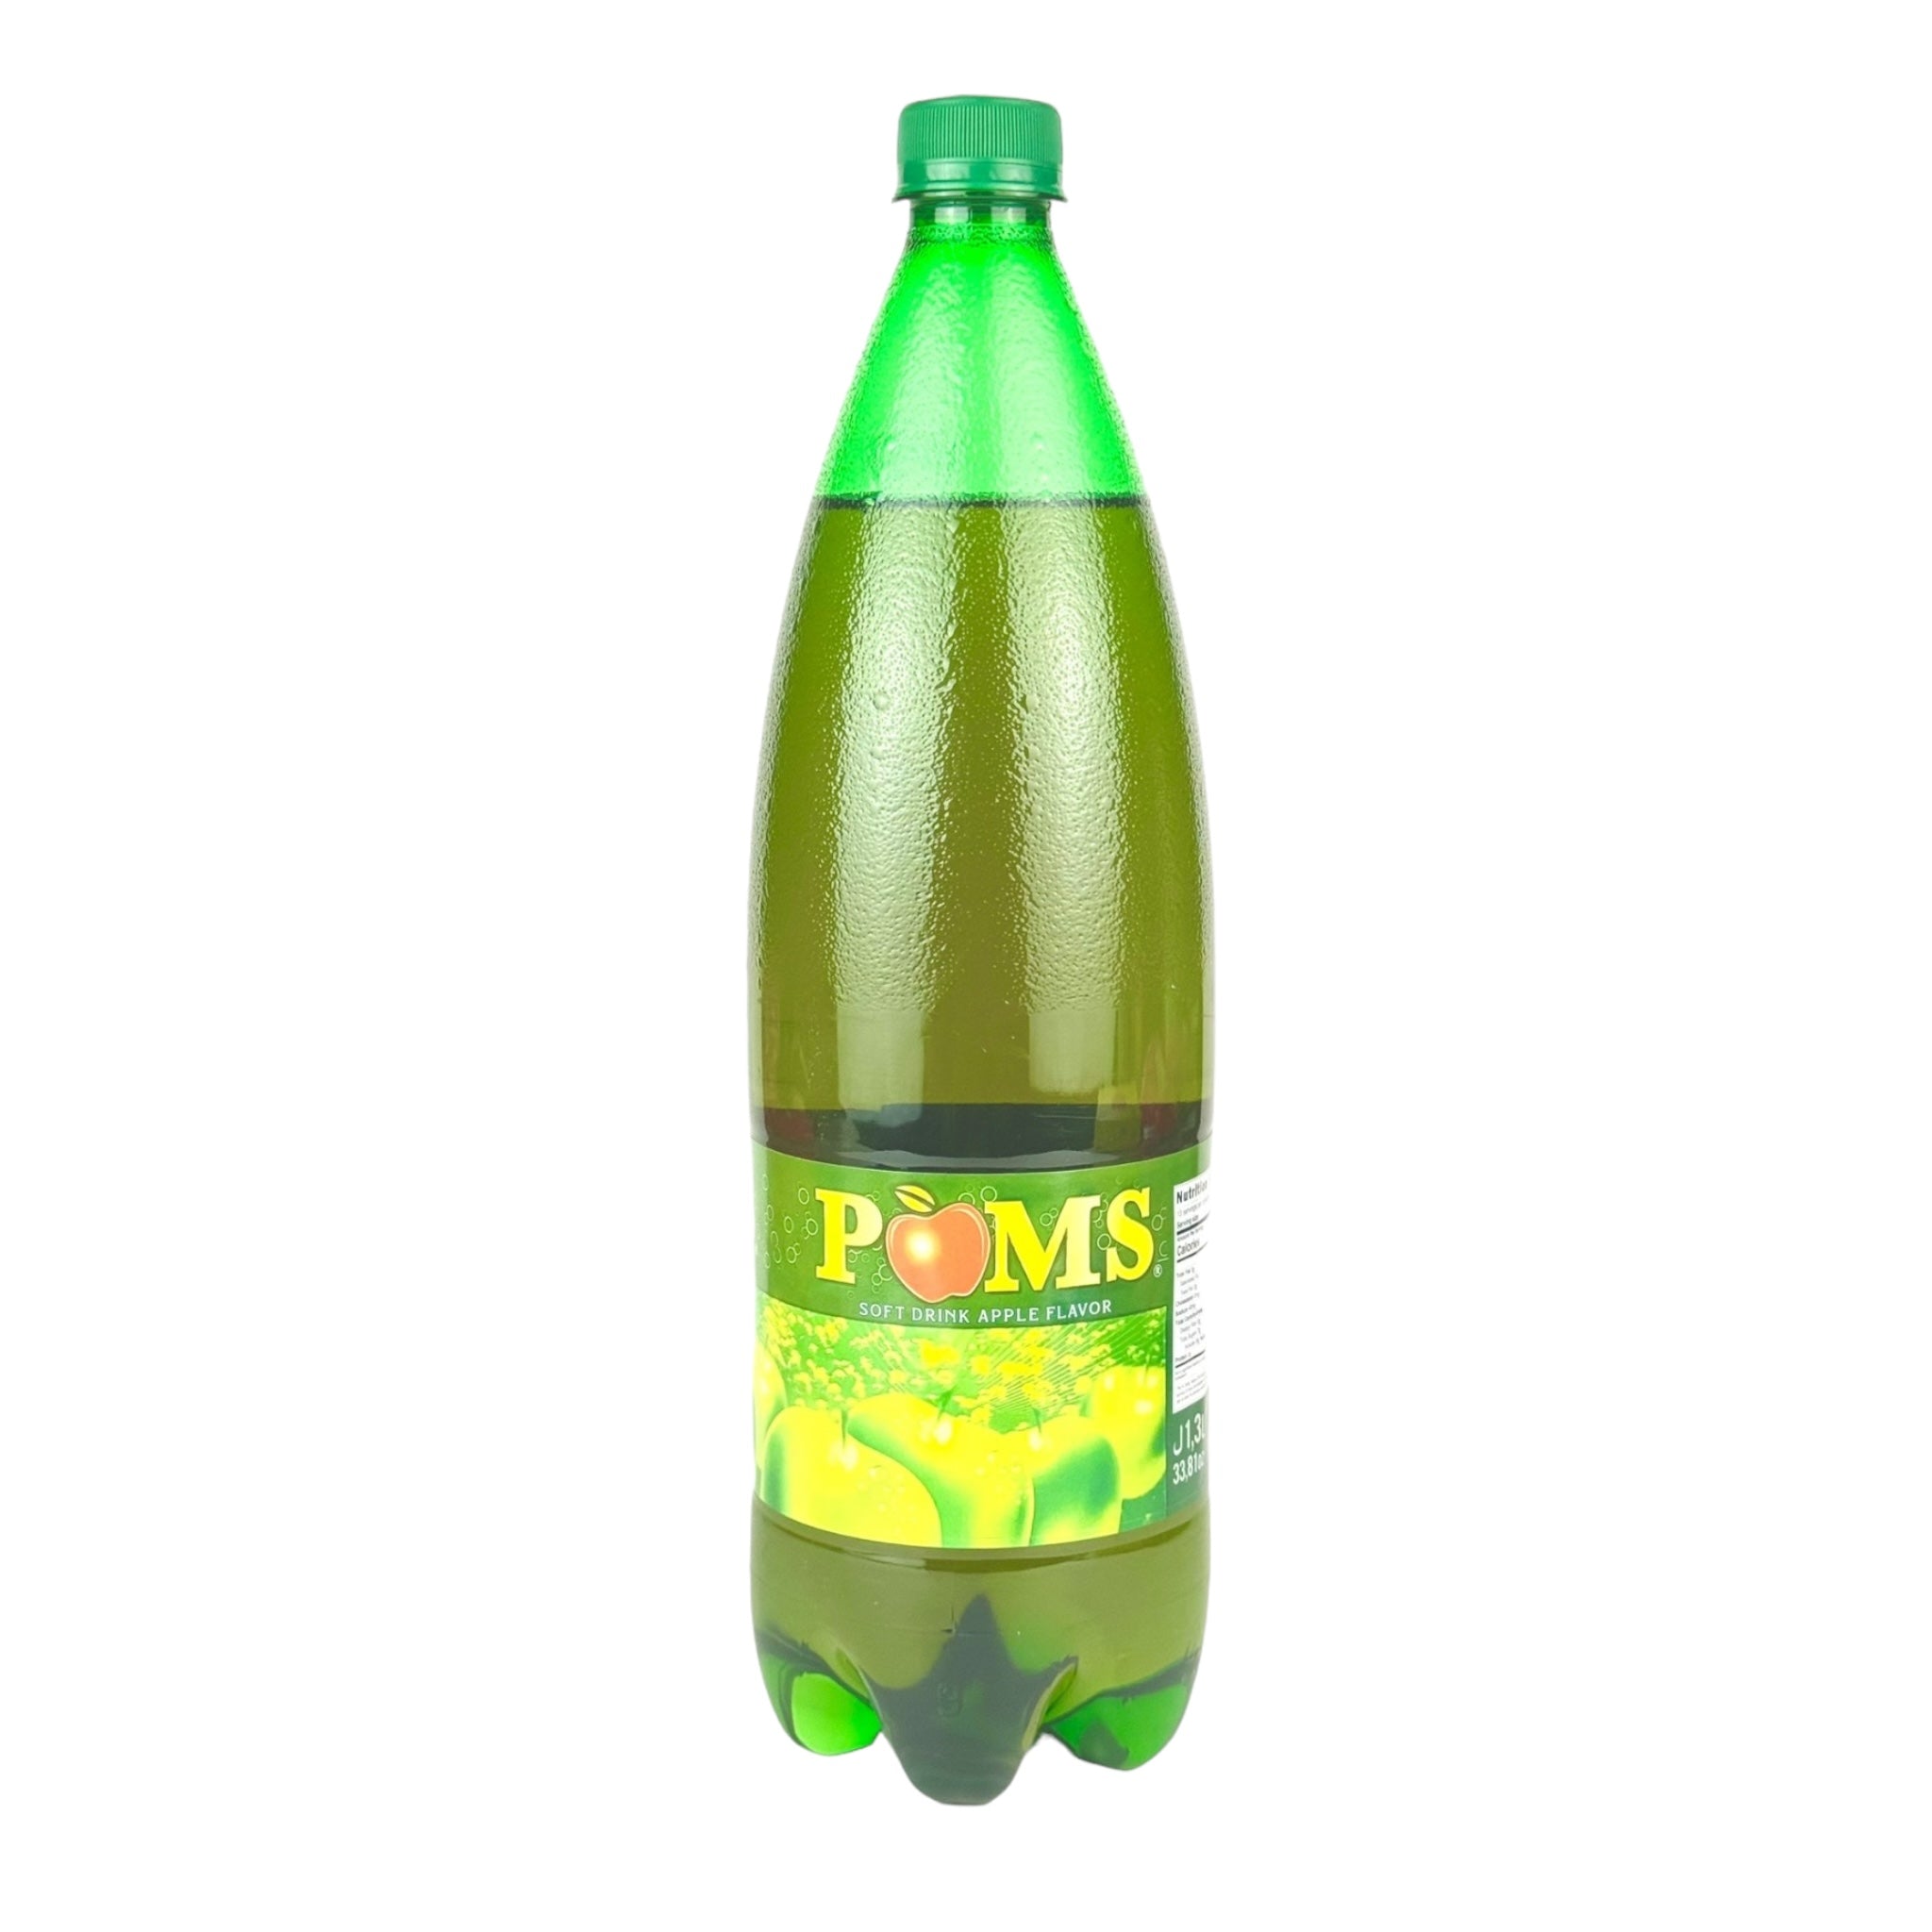 POMS Apple Flavored Soft Drink - A Moroccan Soda